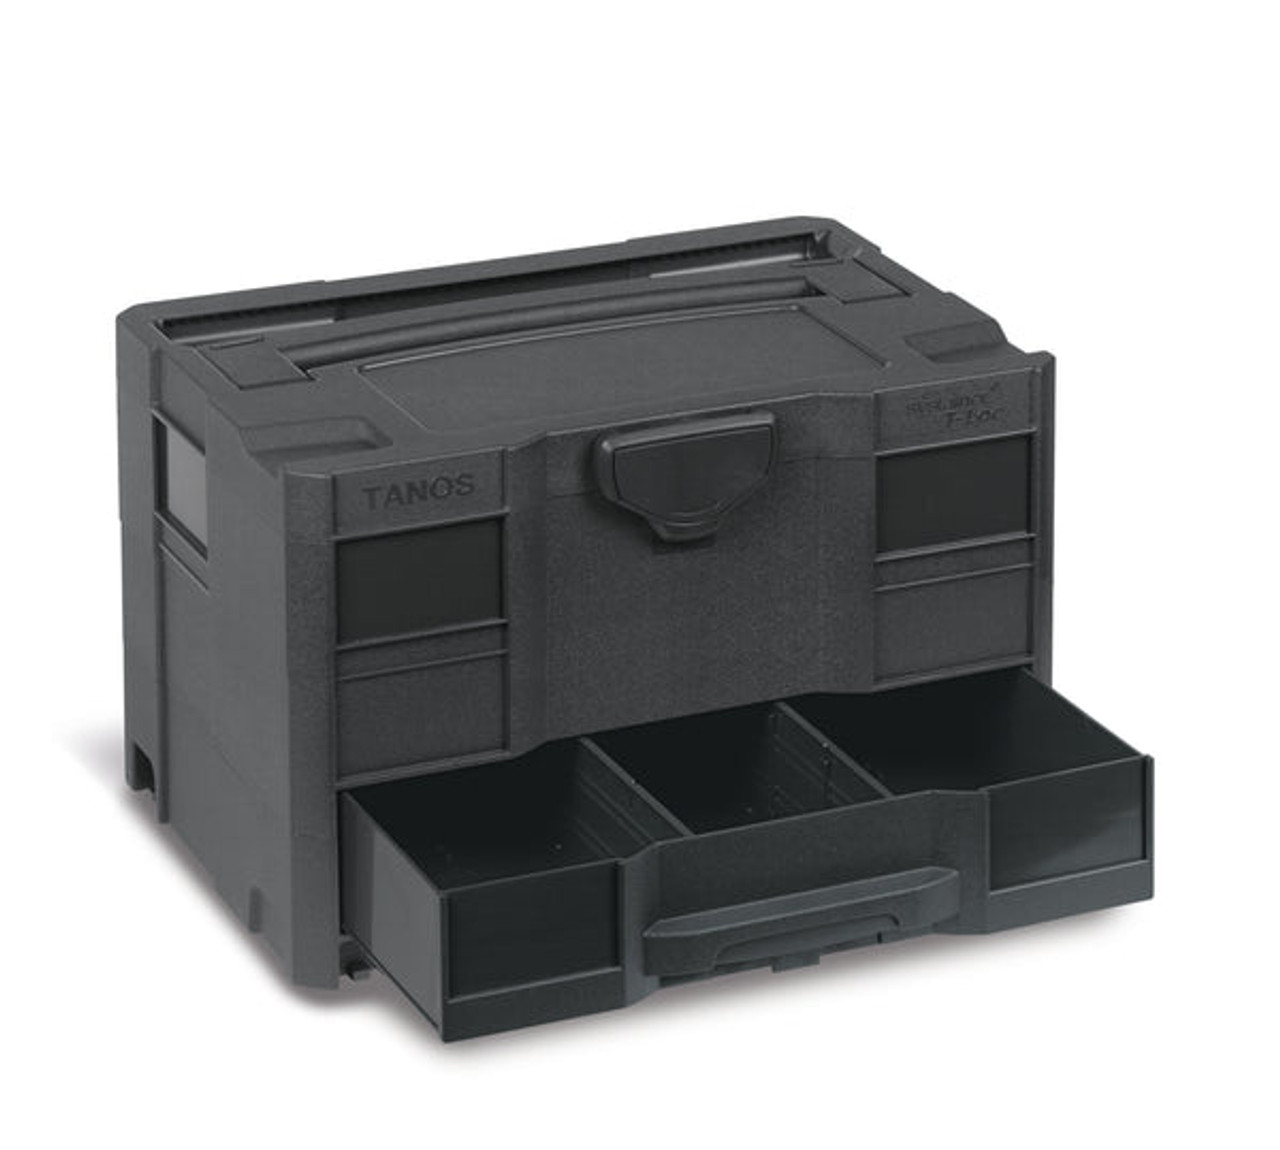 Buy Online a T-Loc Combi from TANOS Sys3 Combi Anthracite with Anthracite for the Cabinet Making and Cabinet Making Industry and Carpenters in Australia and New Zealand